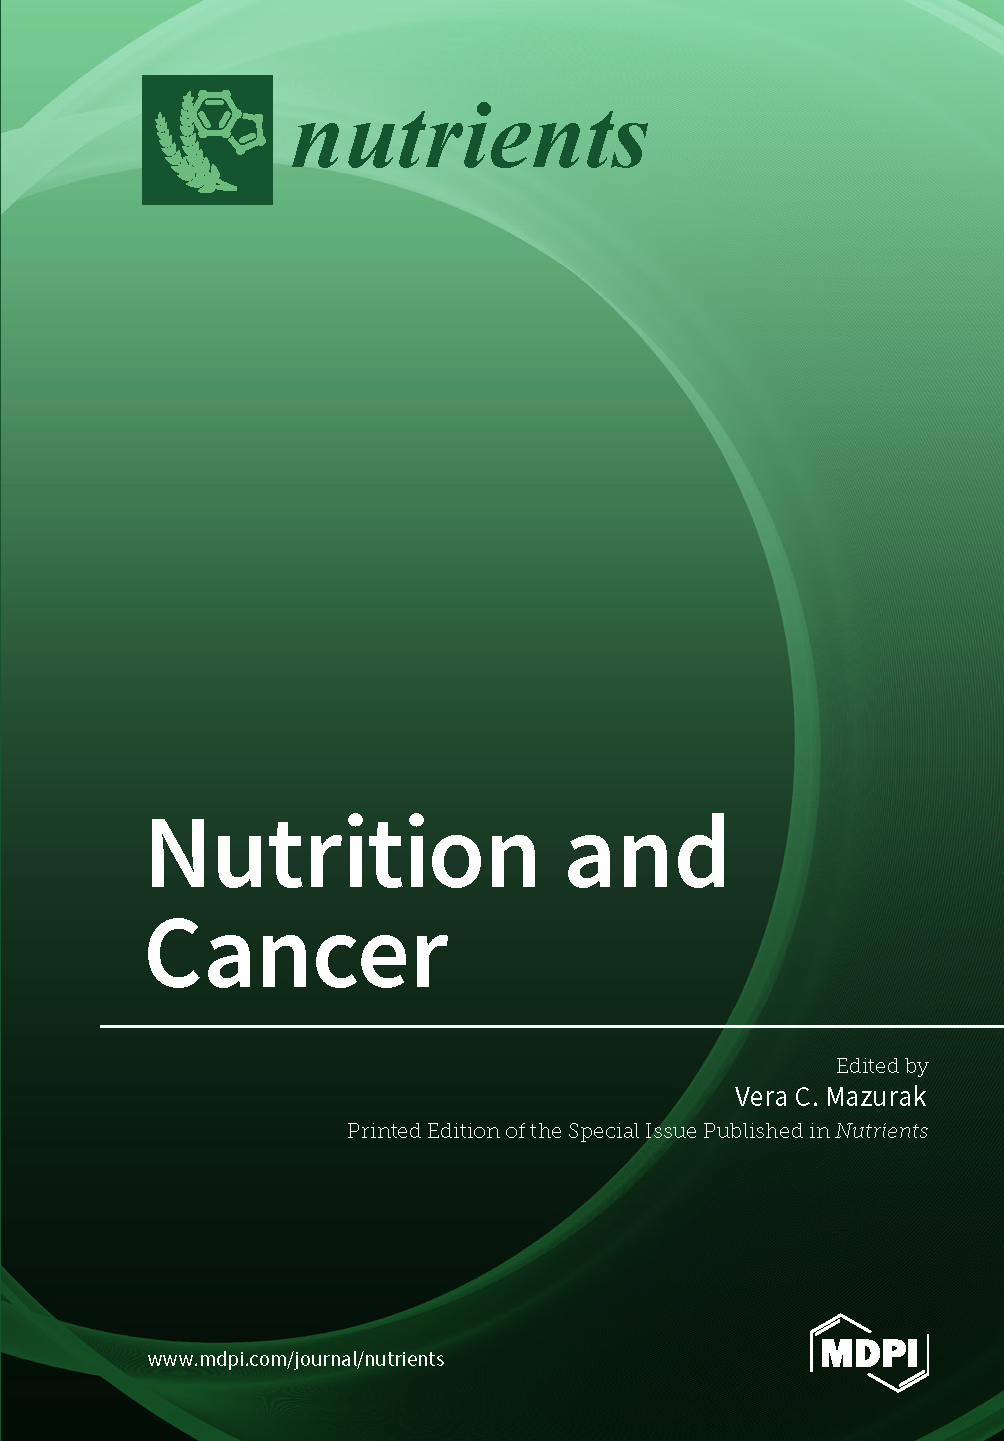 Nutrition and Cancer